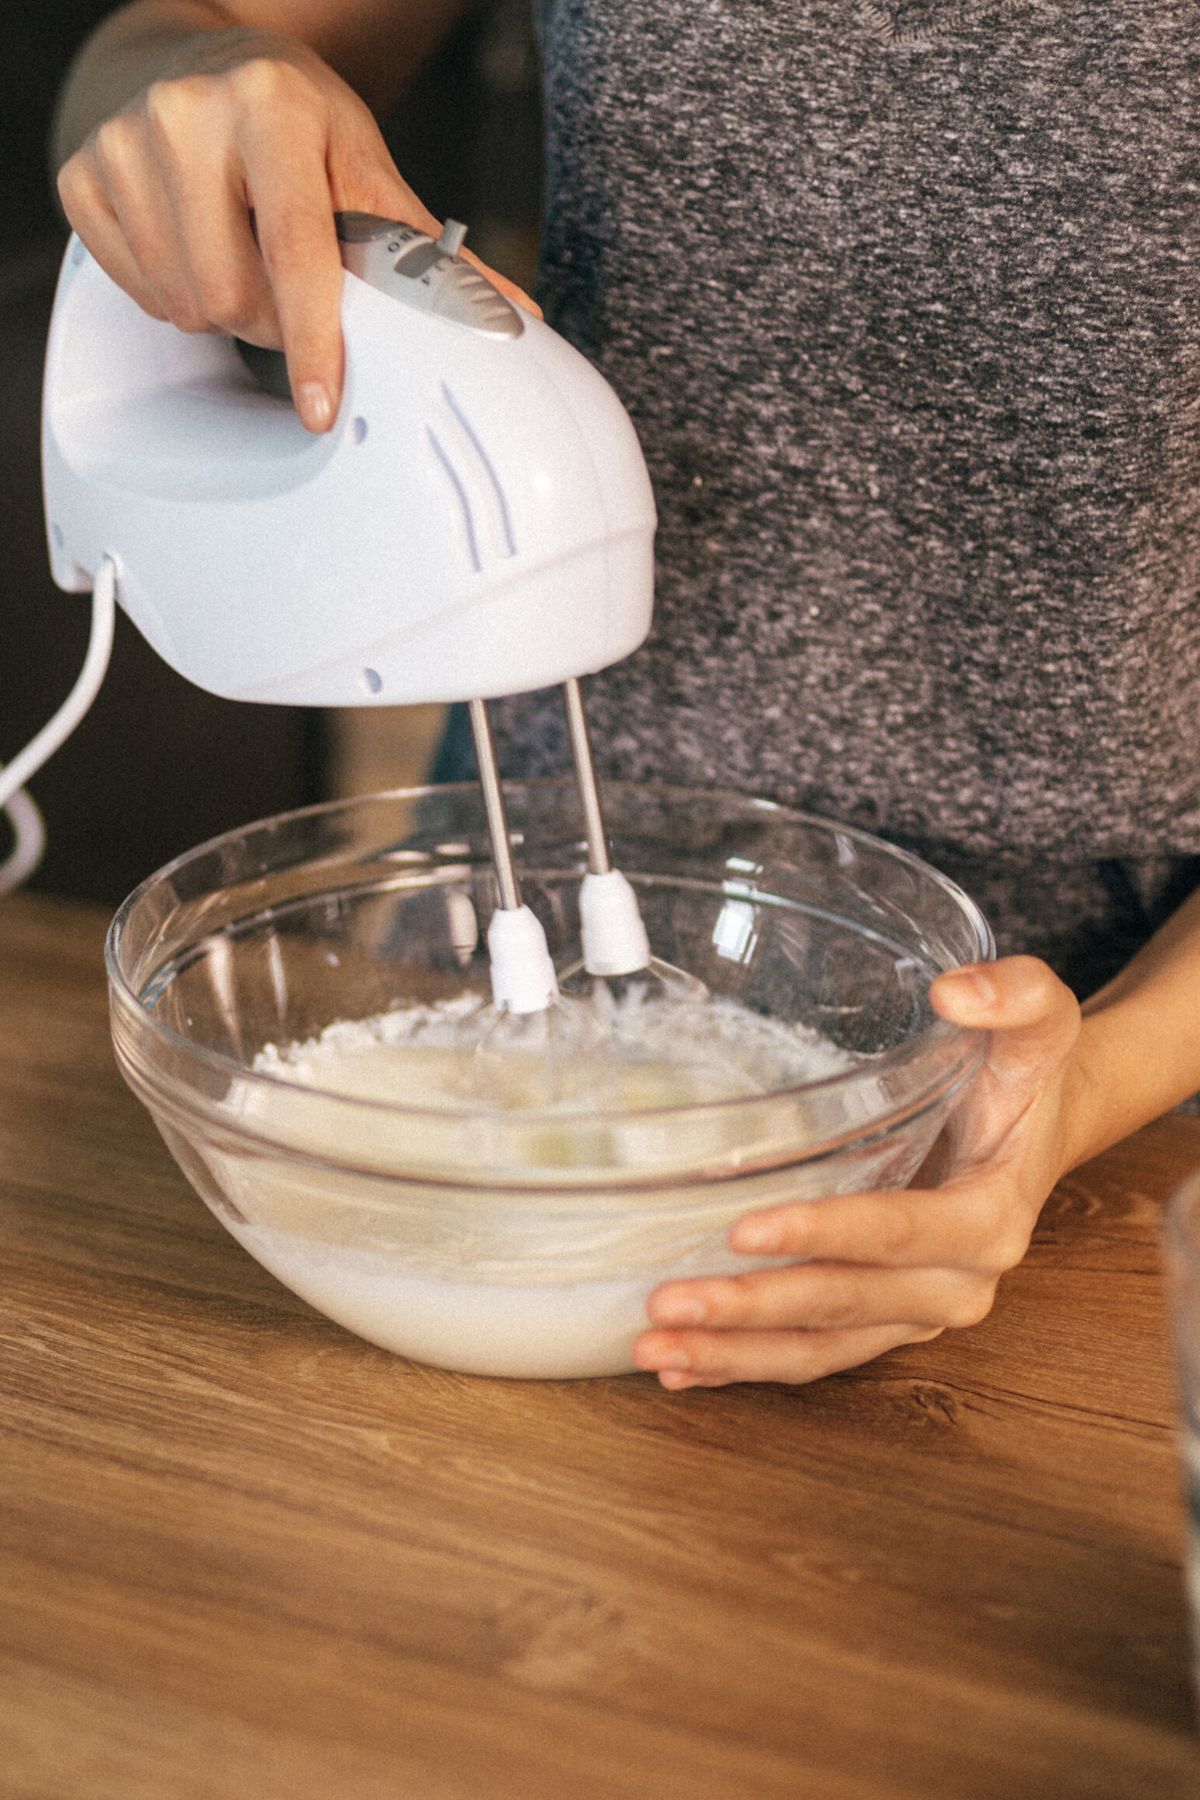 A woman using a hand mixer in a glass bowl of frosting.